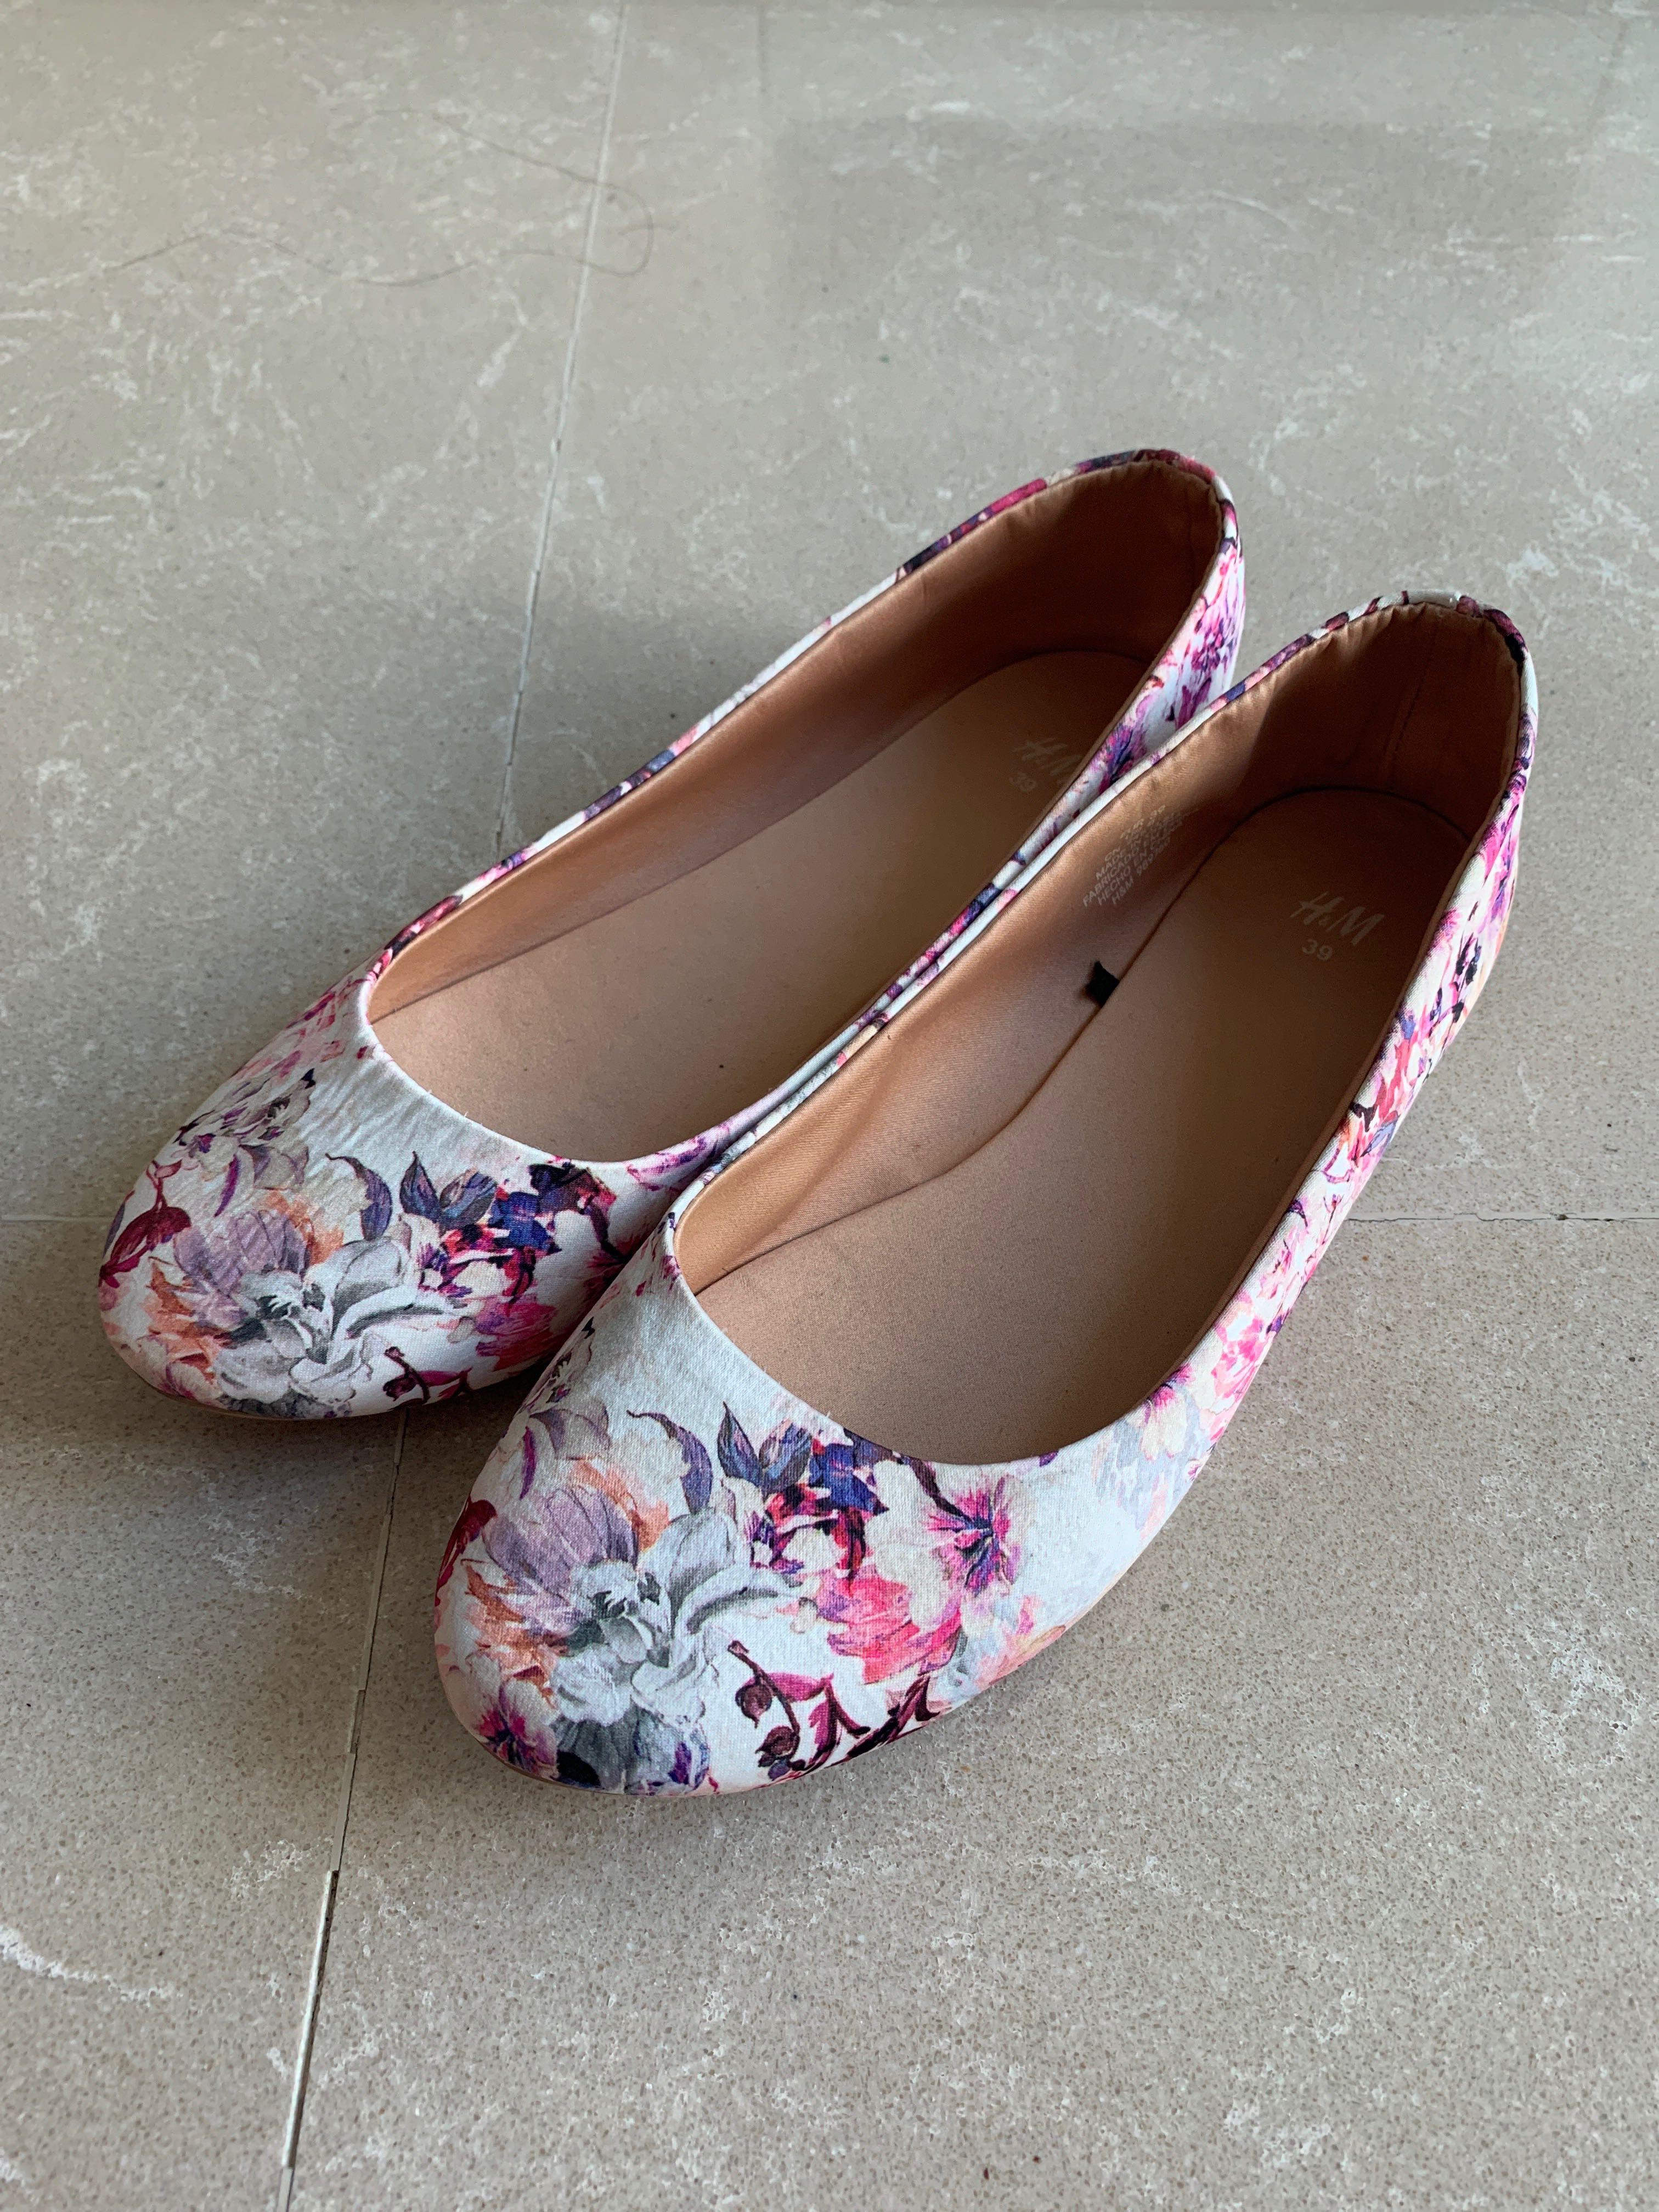 https://media.karousell.com/media/photos/products/2021/9/17/floral_flats_lilac_pink_and_pu_1631838910_438c1e14_progressive.jpg